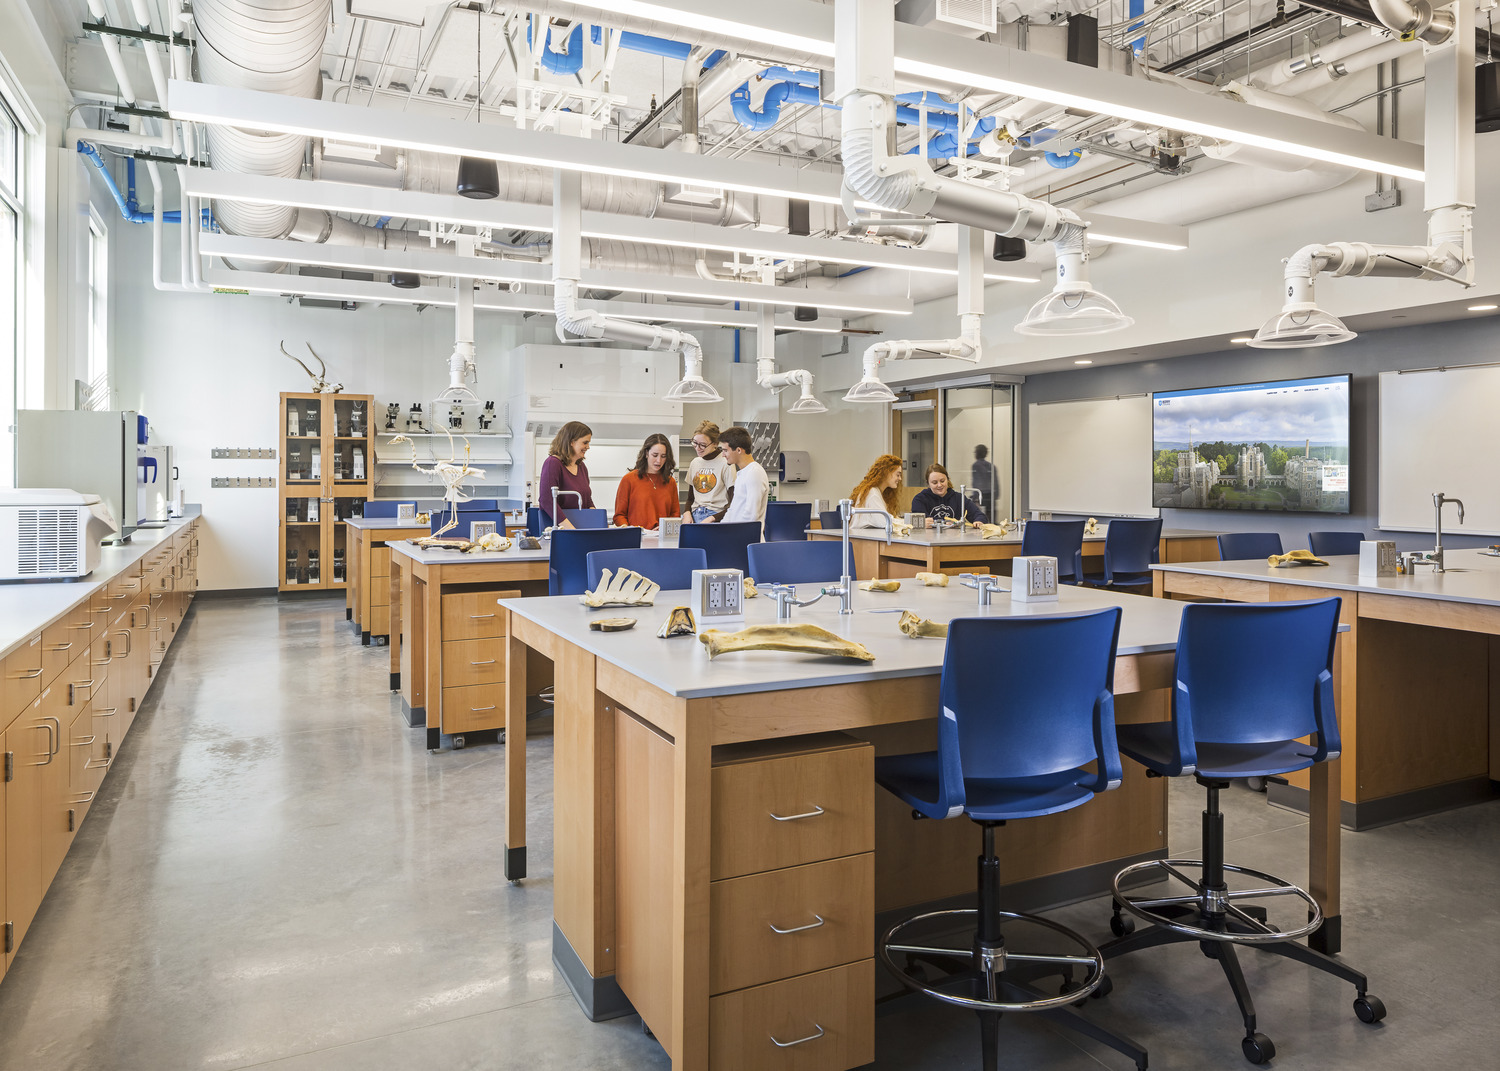 Anatomy & Physiology Teaching Lab – This lab is used to study the anatomy & physiology of animals. Being at Berry, they study animals such as cows, pics, and even horses to understand the skeletal structure and how bones interact with each other and the entire system at large. 